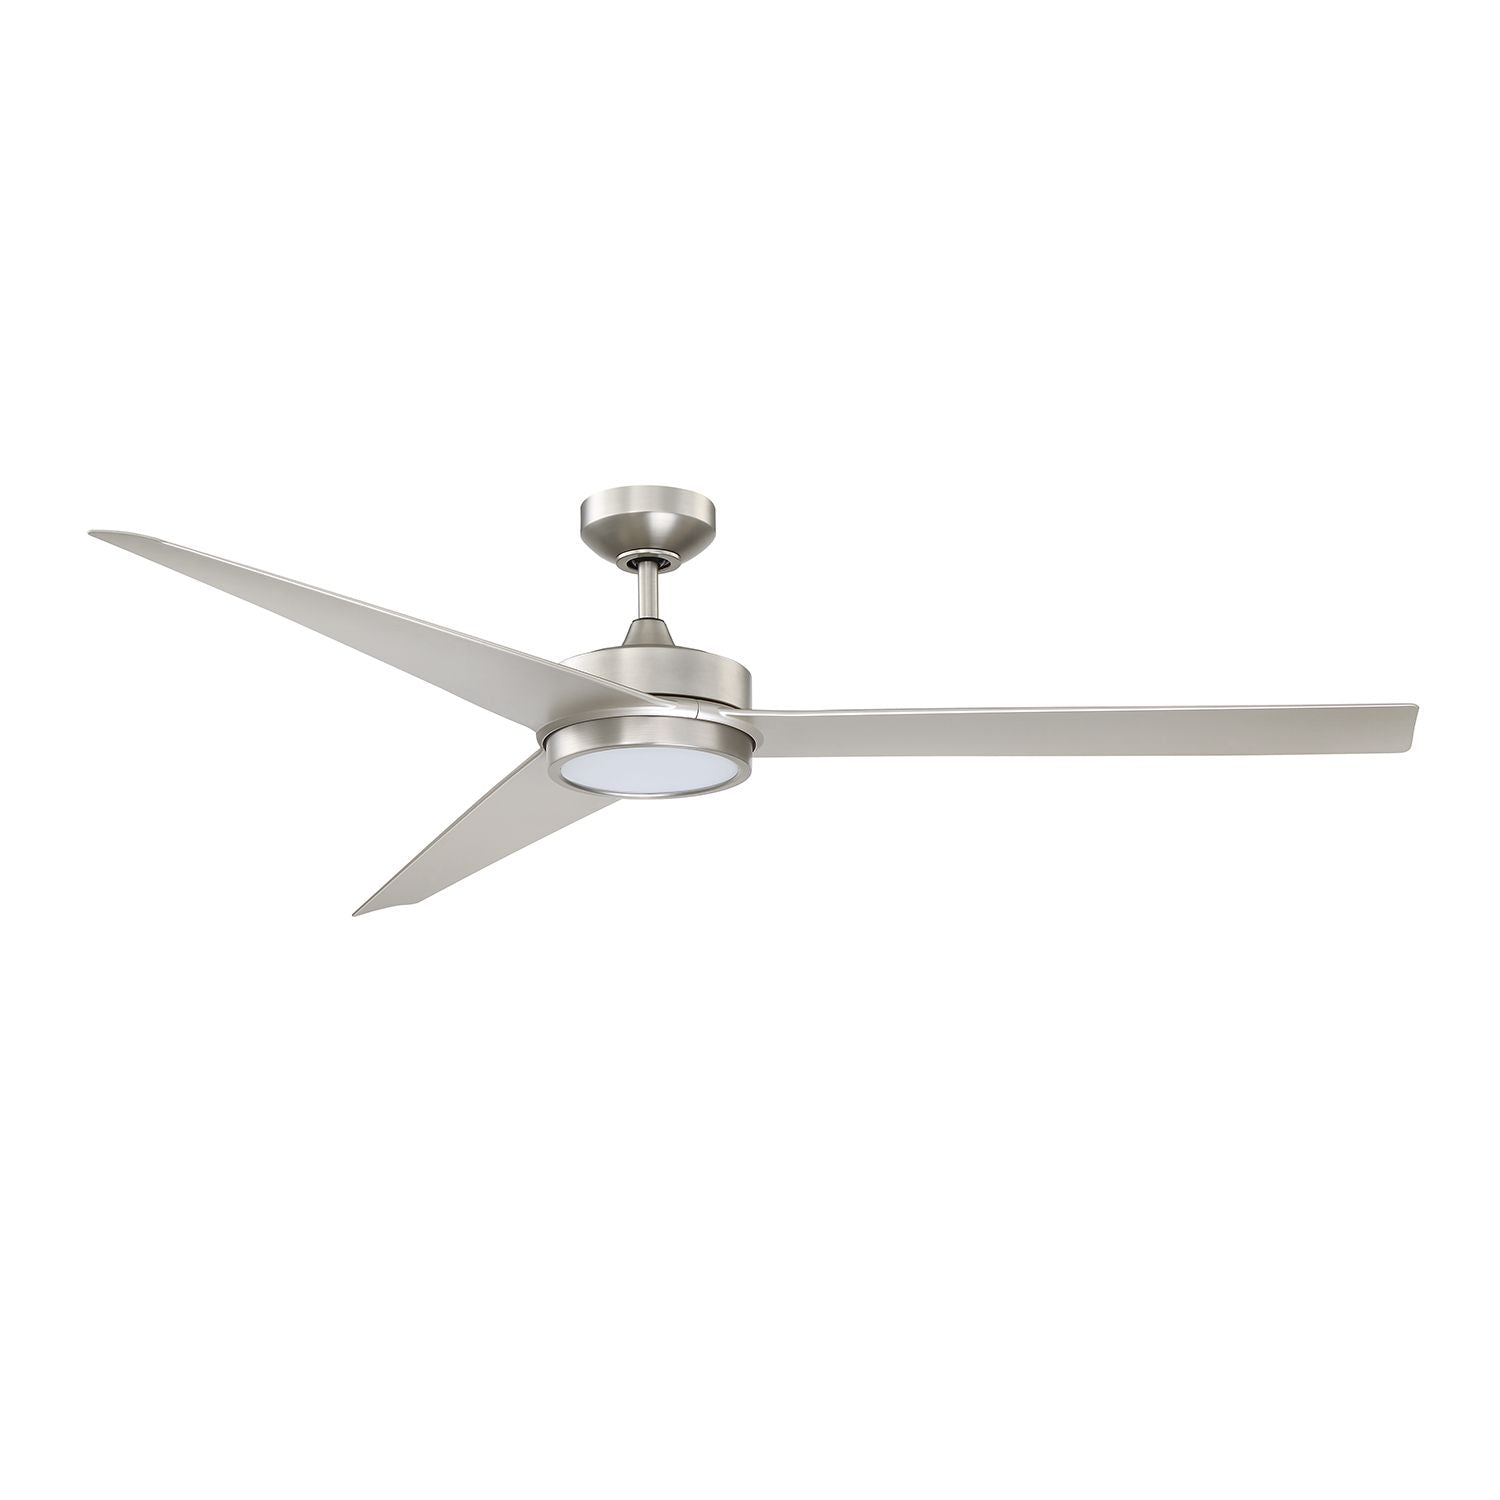 Triceptor Ceiling Fan Satin Nickel with matching blades